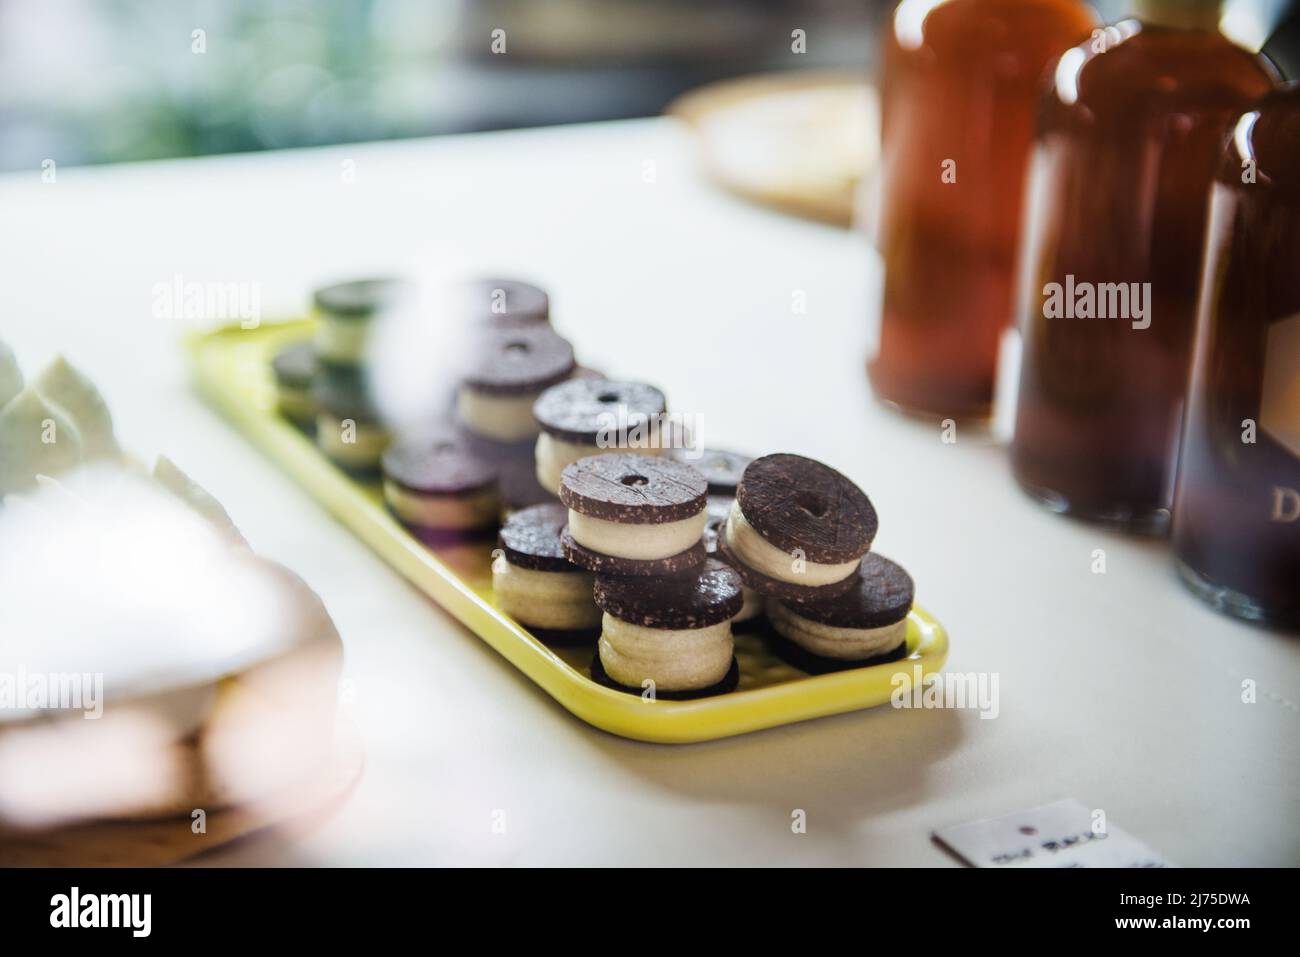 Gourmet cookies with chocolate filling. Stock Photo